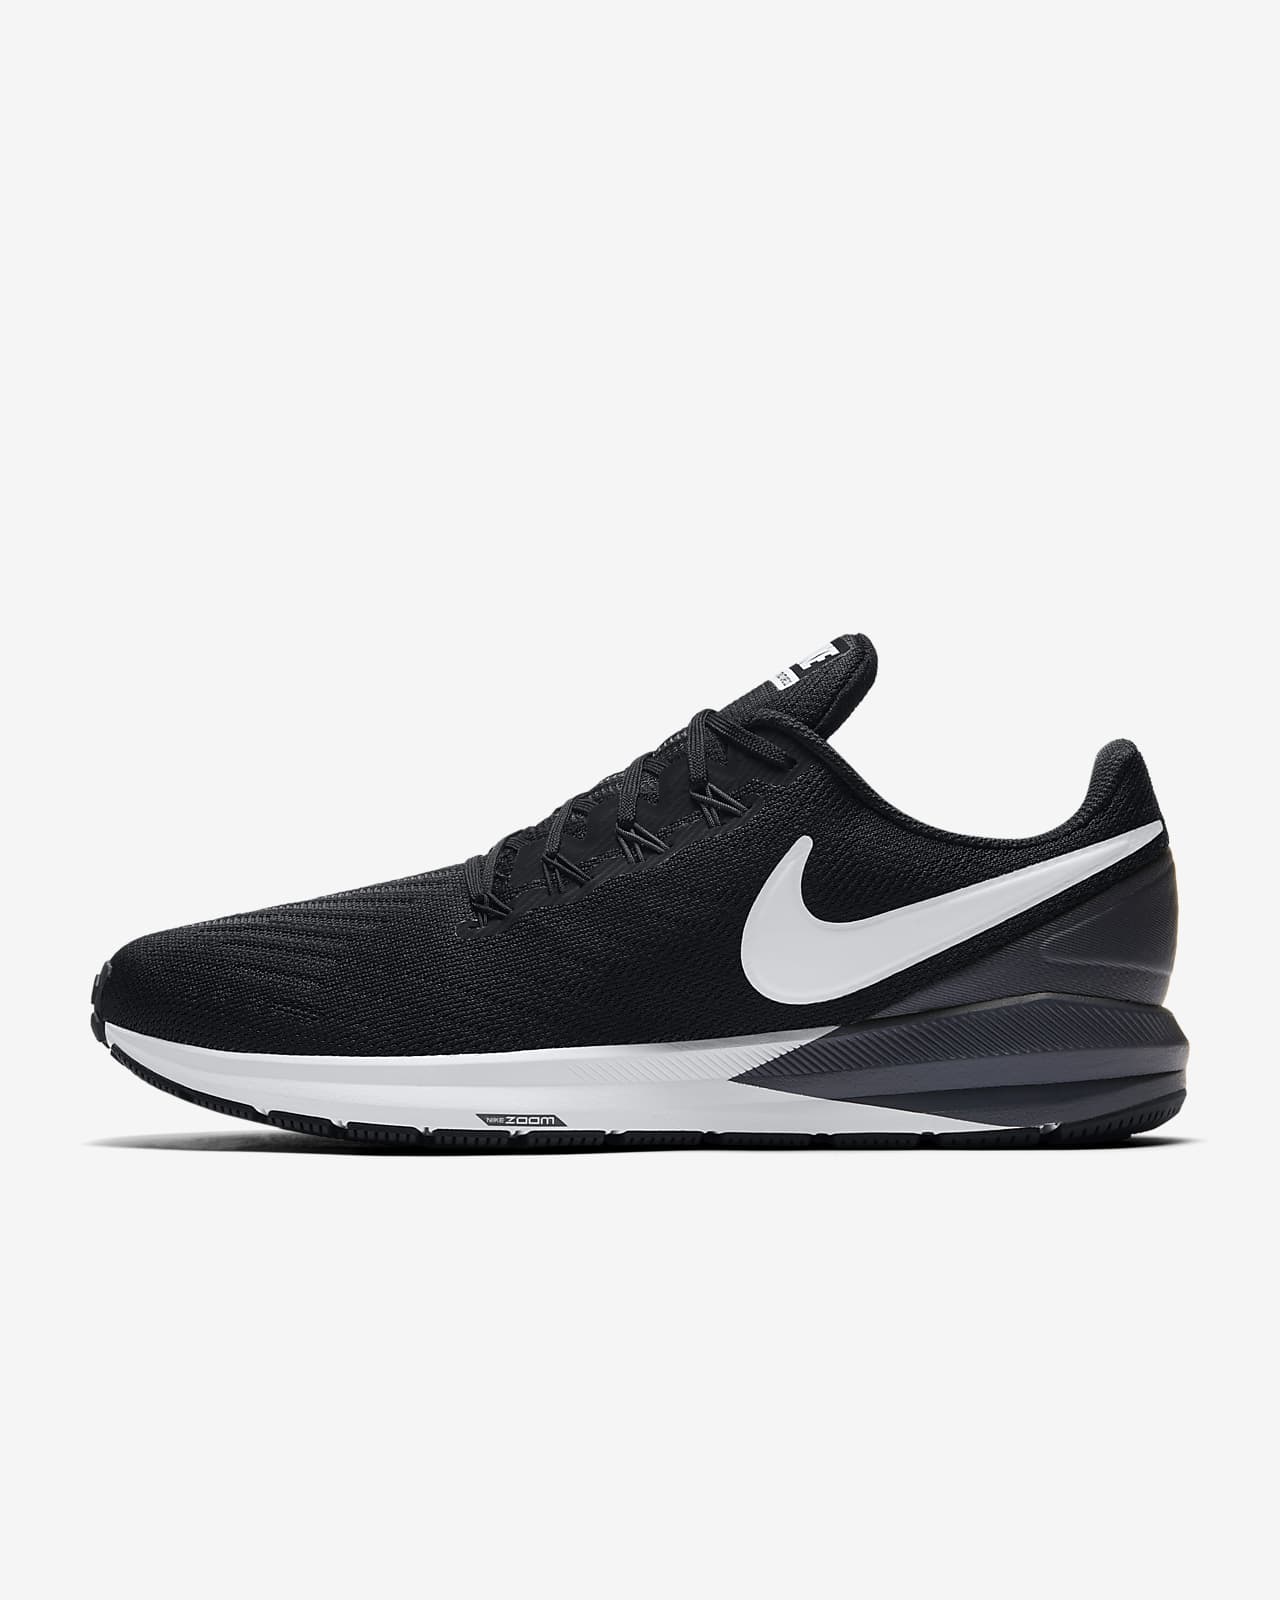 Nike Air Zoom Structure 22 Men's 